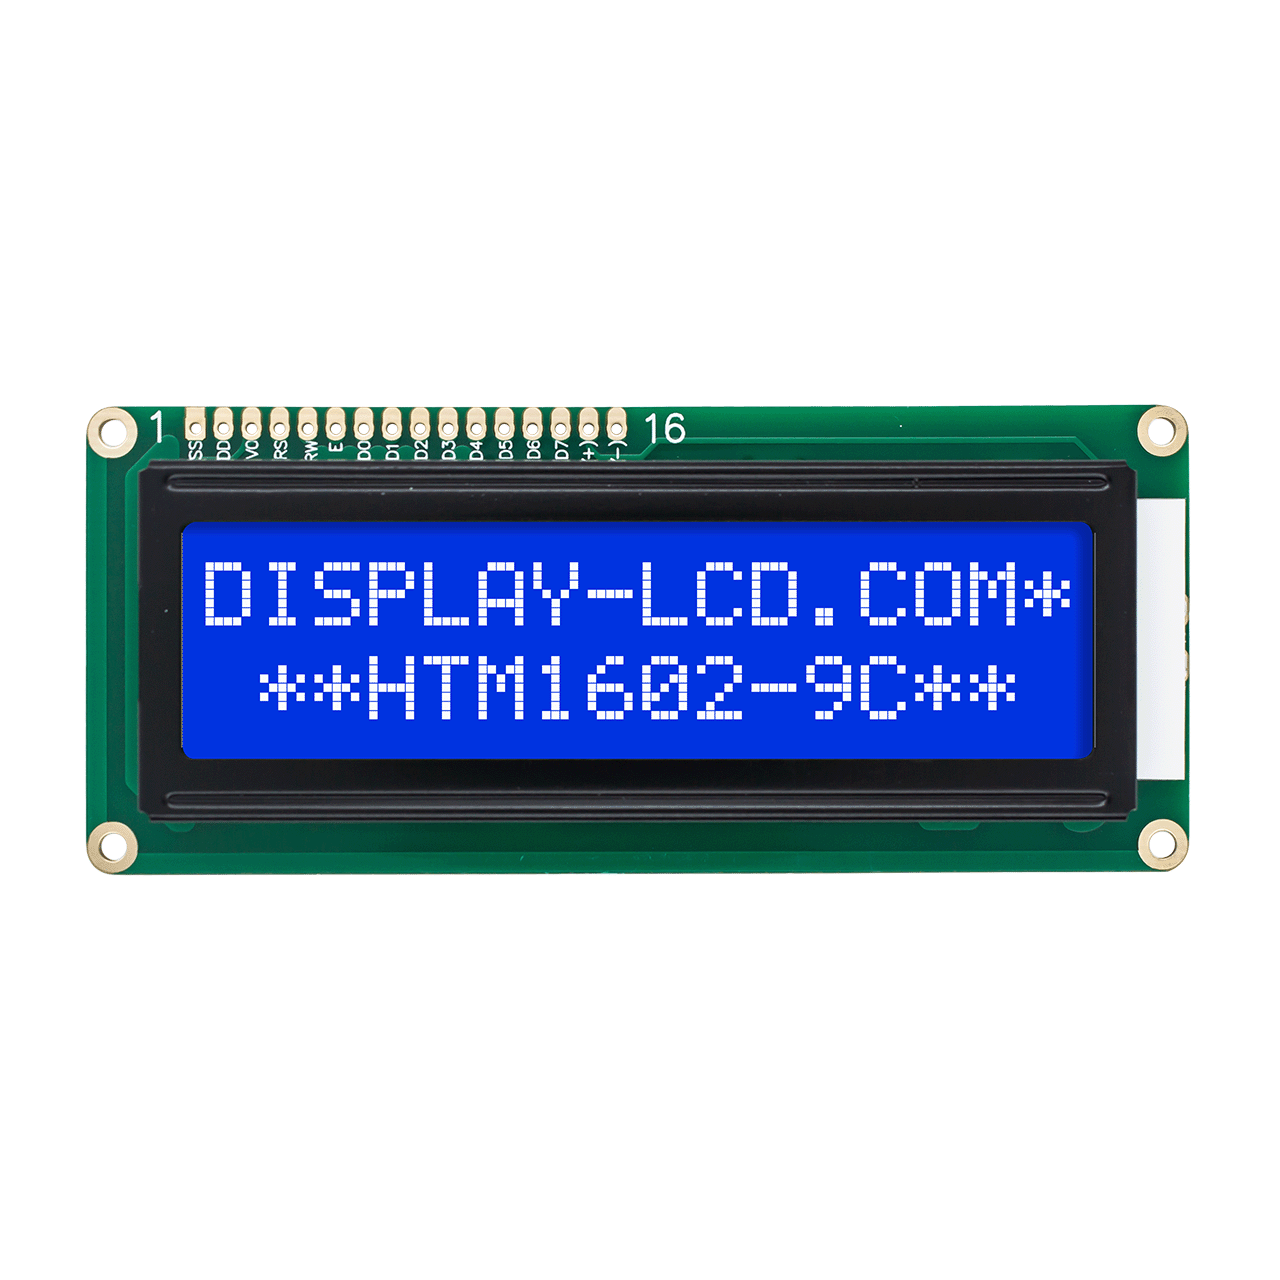 2X16 Character LCD Module Display | STN- Blue with White Side Backlight 5.0V-Arduino